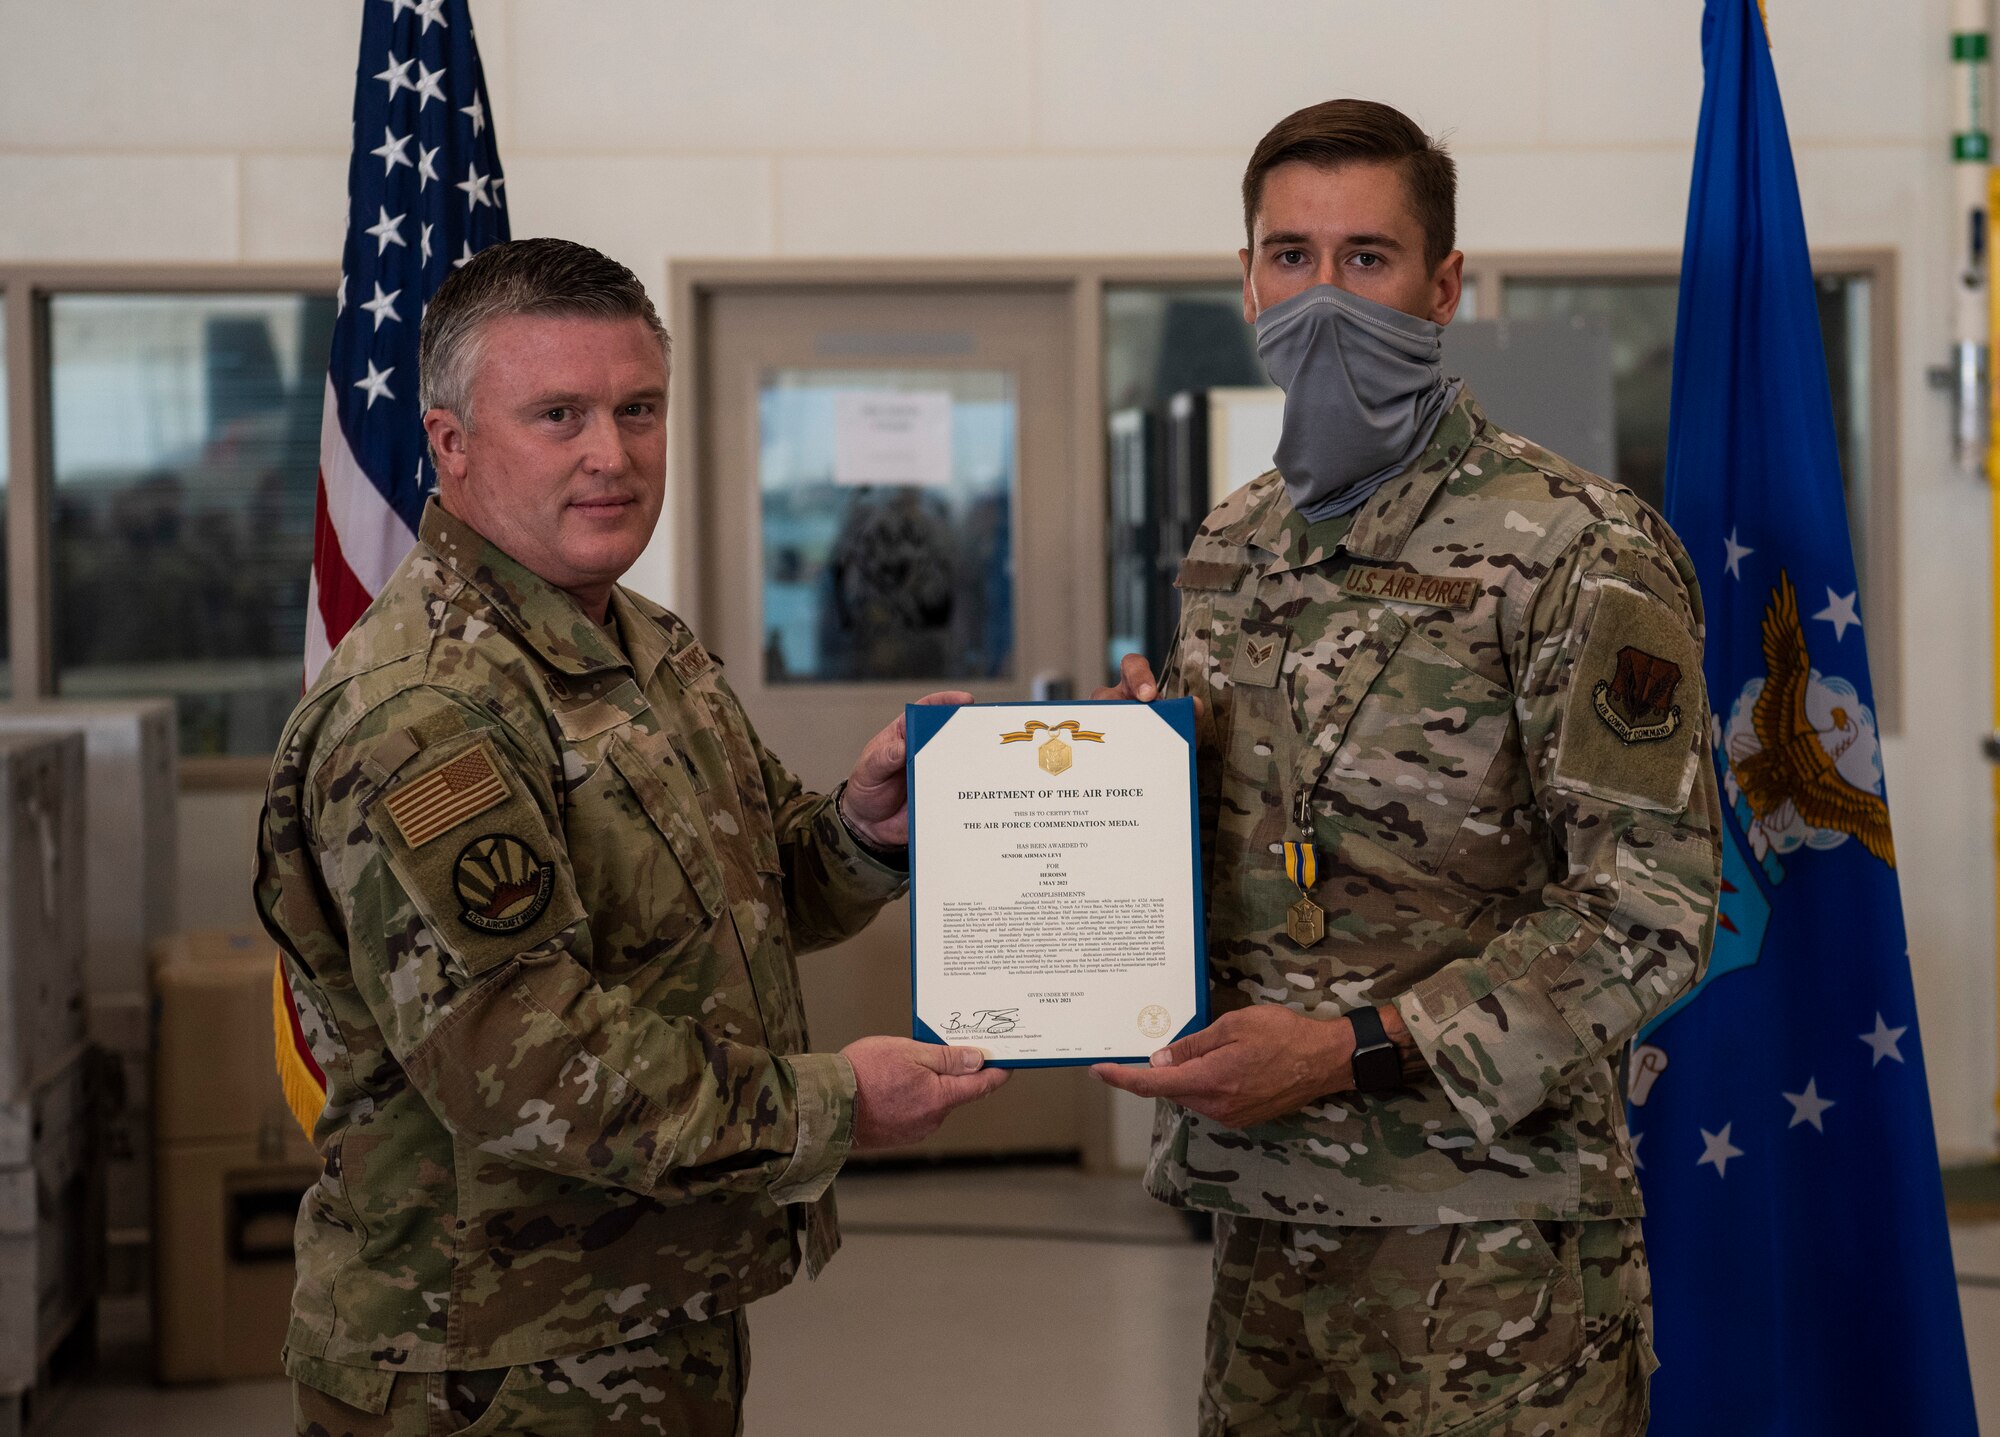 Senior Airman Levi is presented with an Air Force Commendation Medal.